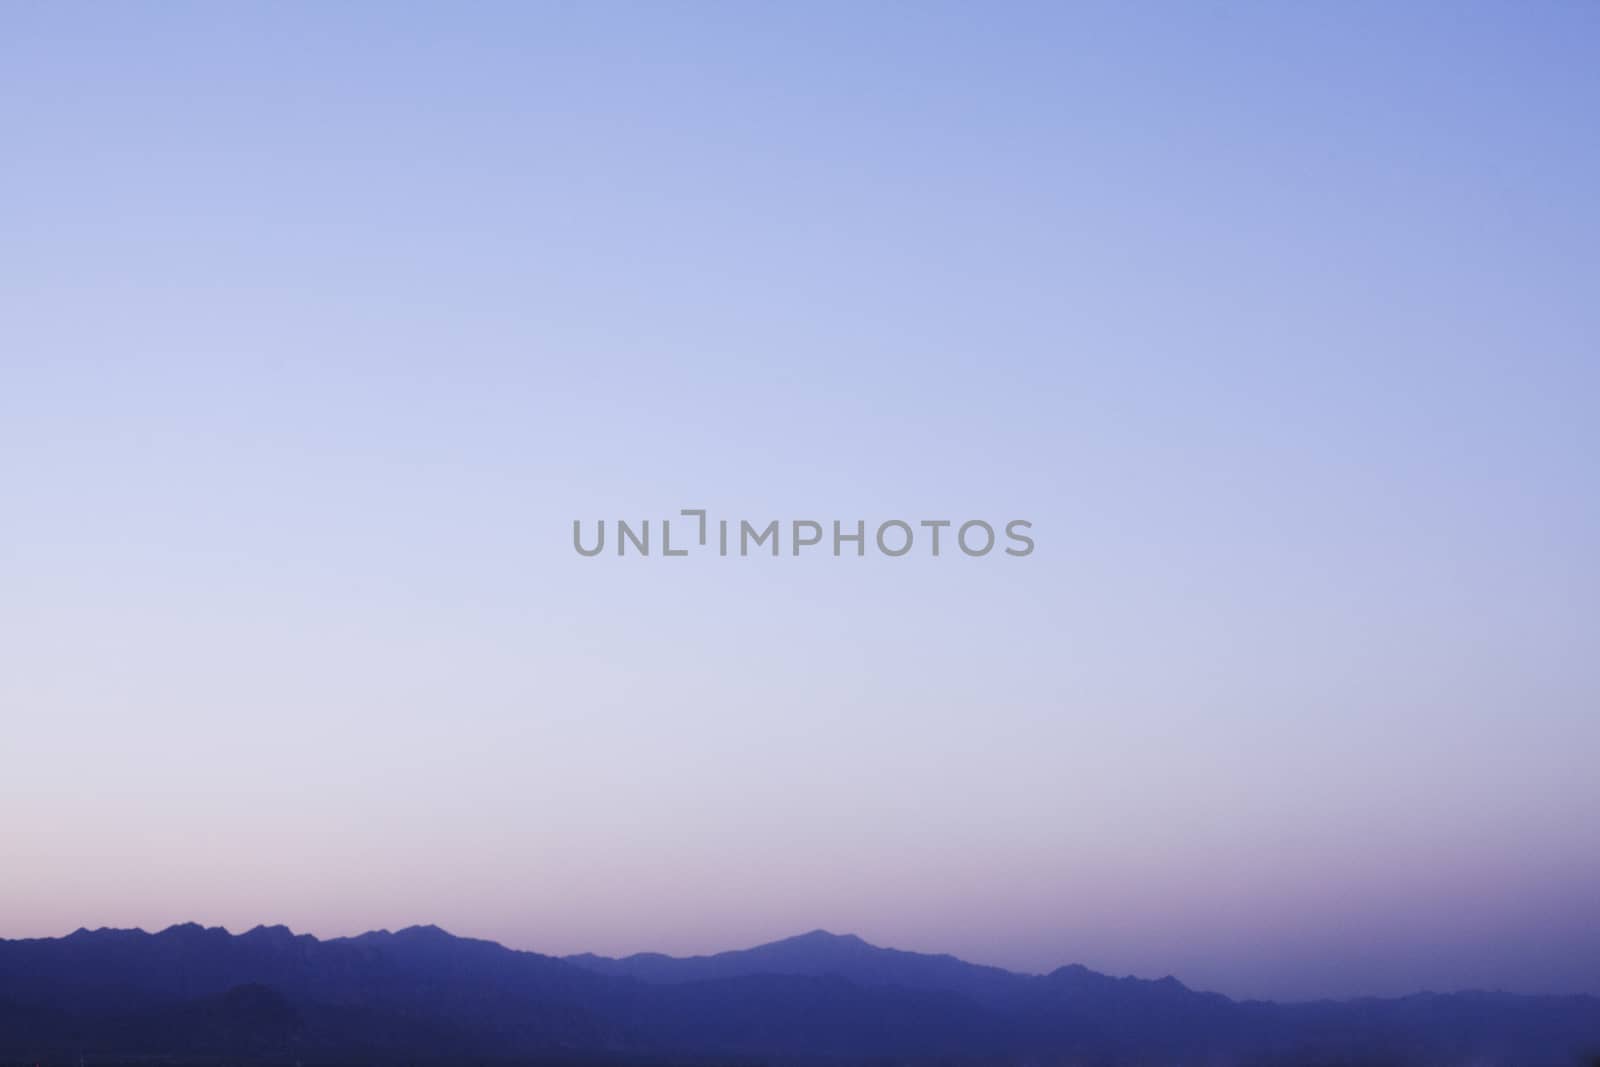 Landscape of mountain range and the sky at dusk, China